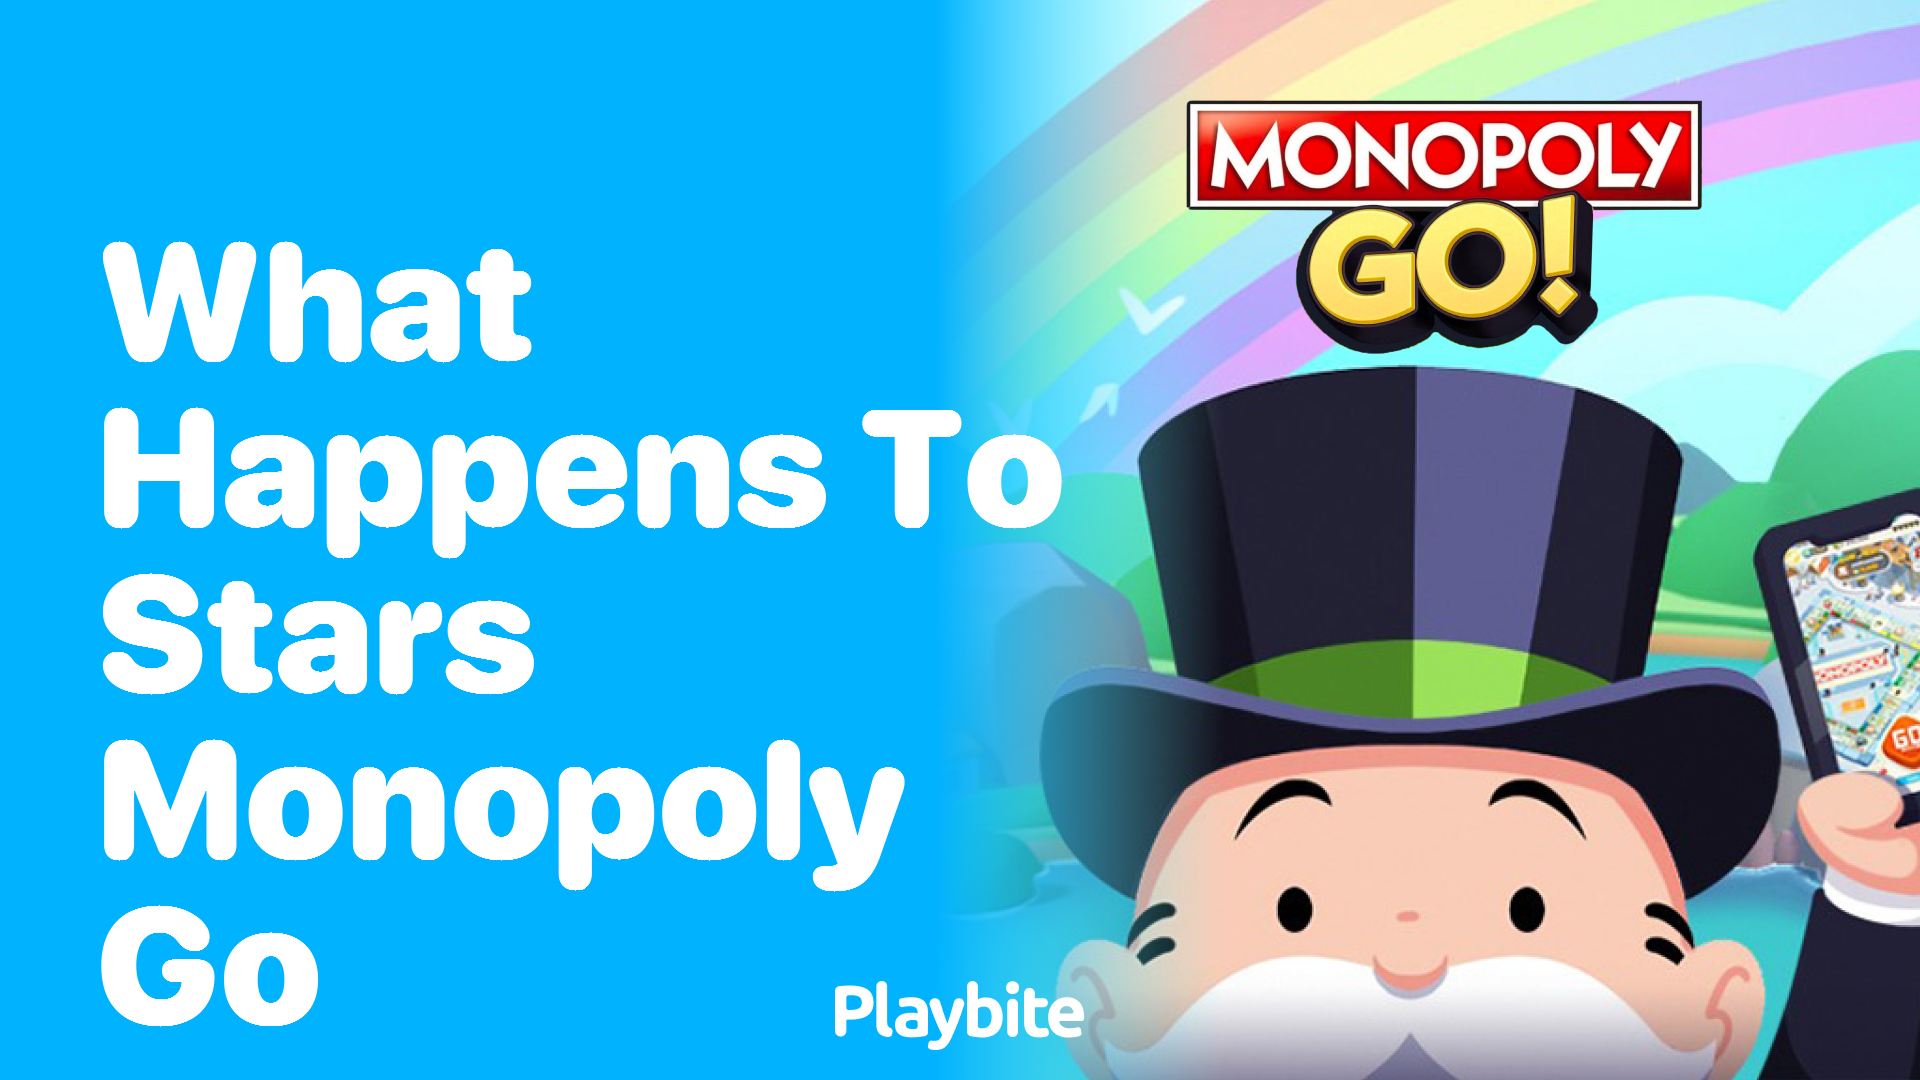 What Happens to Stars in Monopoly Go?